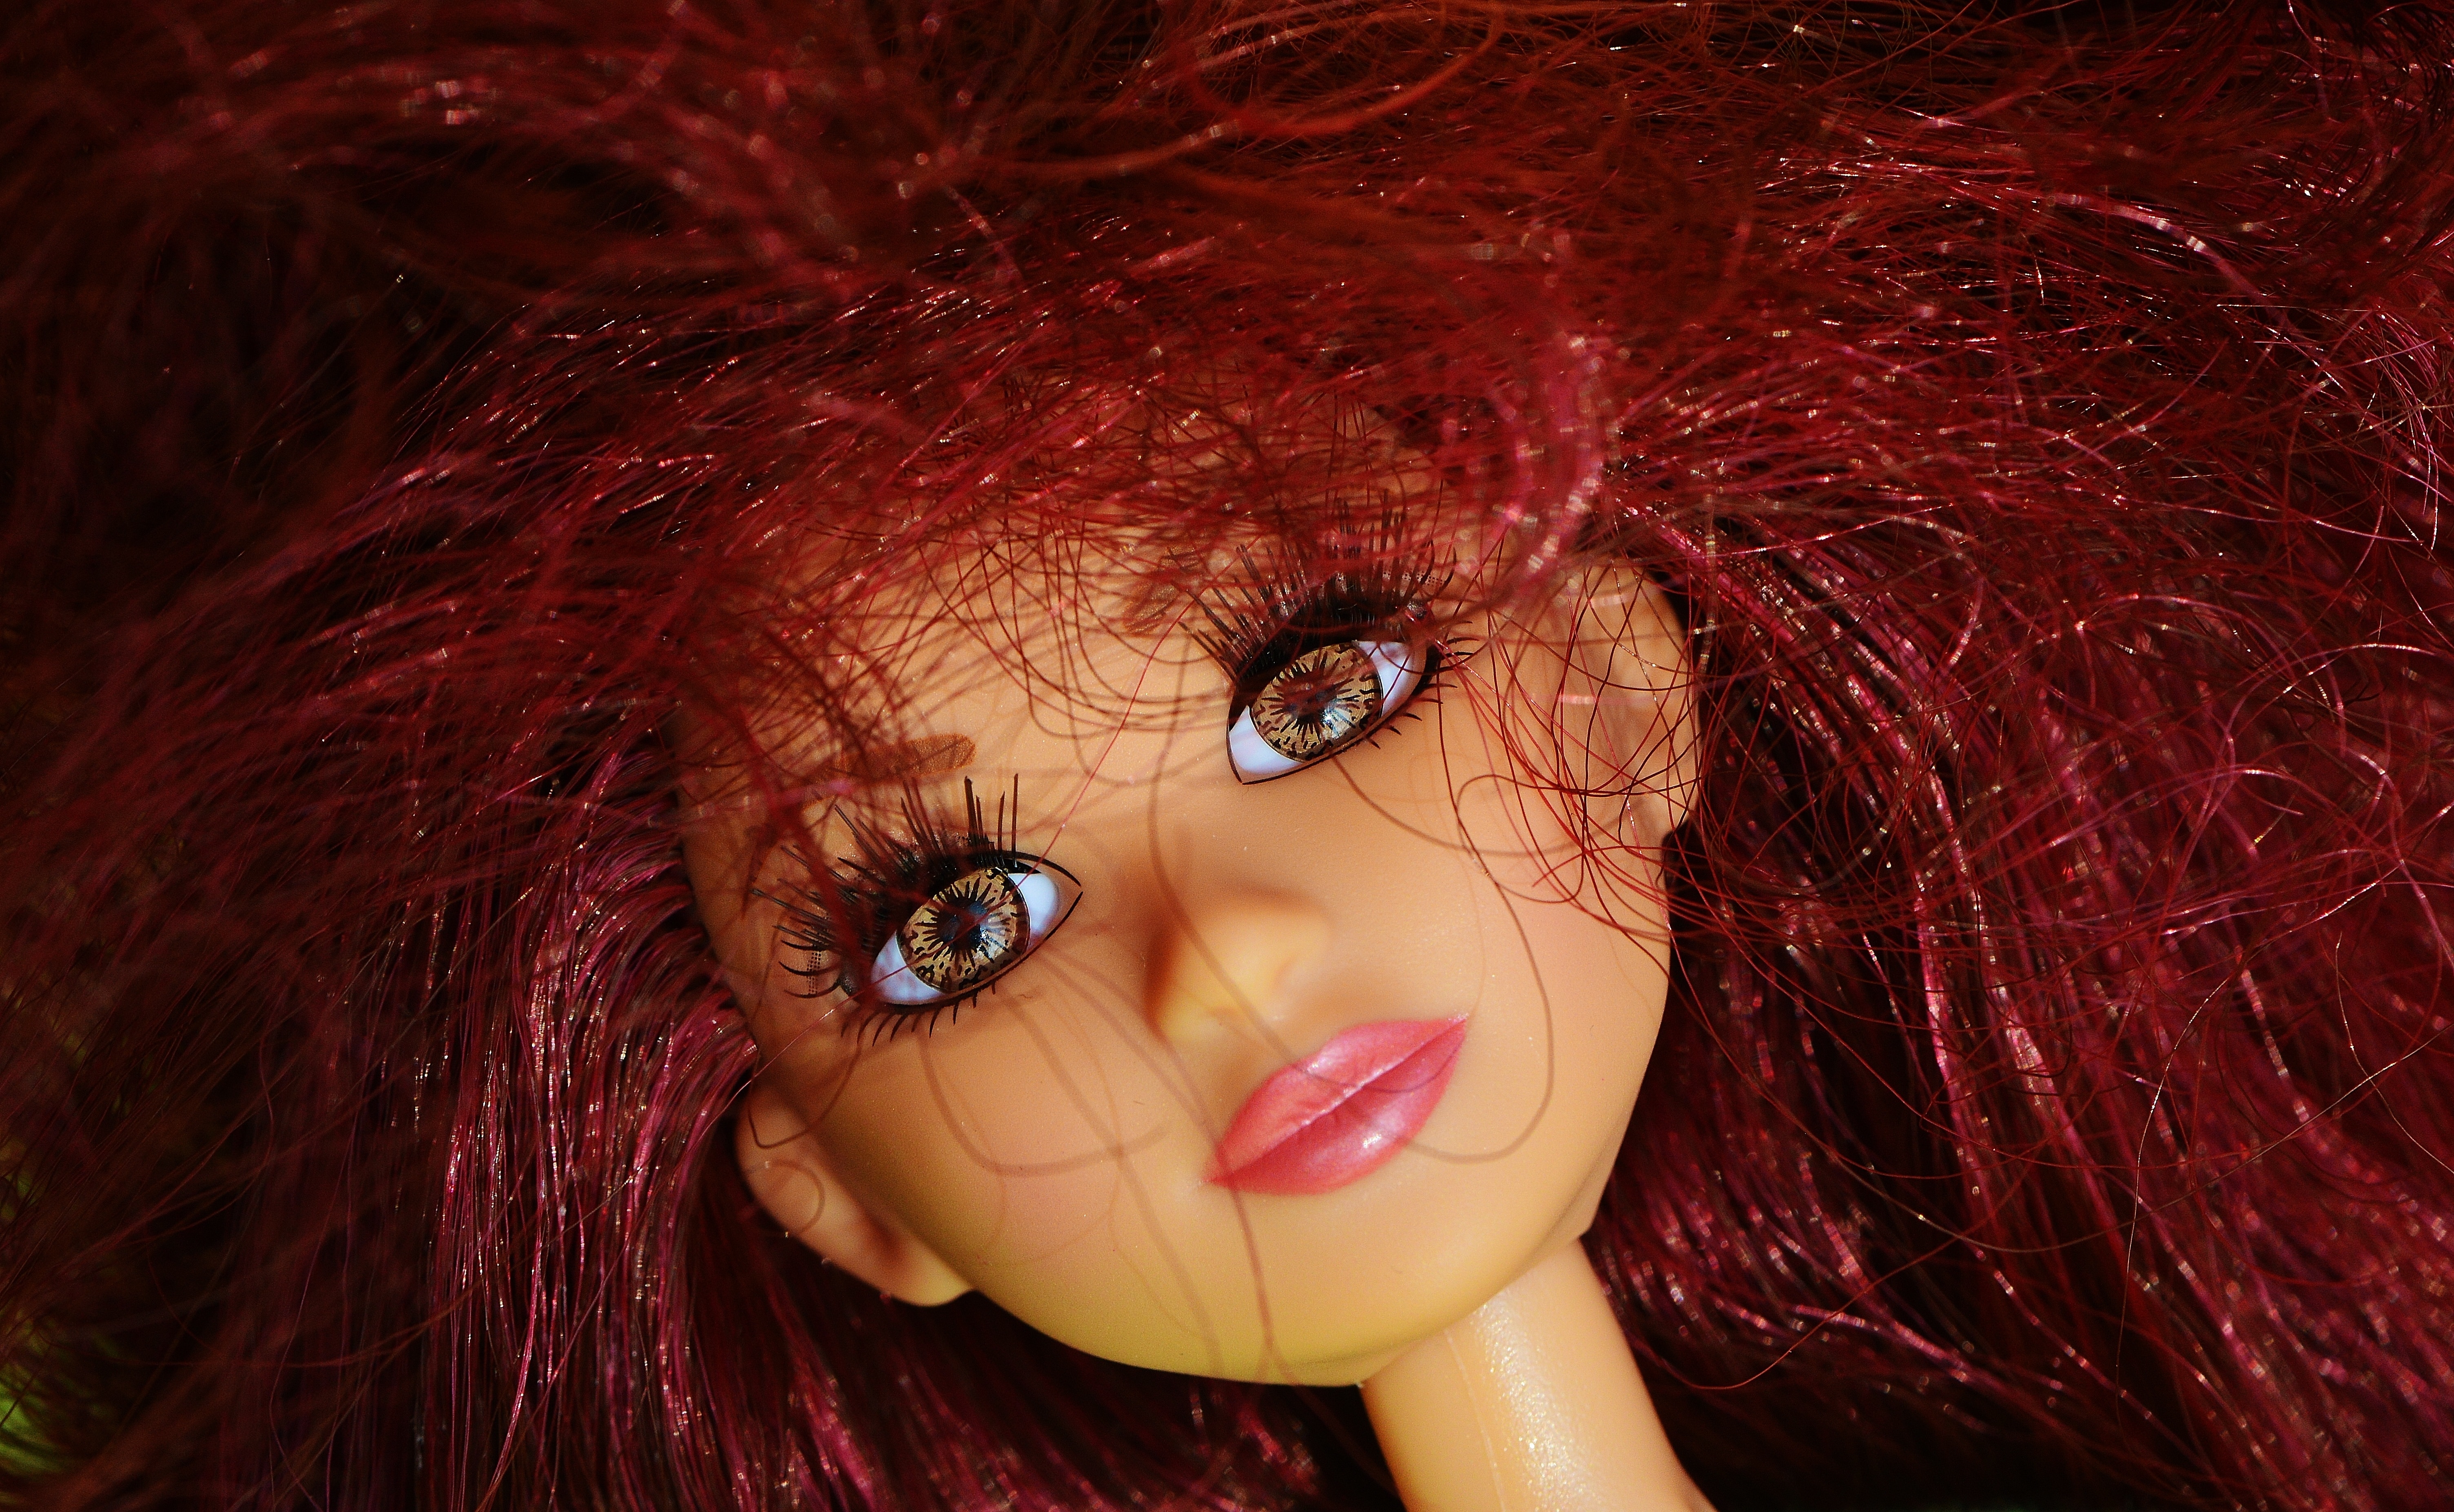 bratz doll with red and black hair